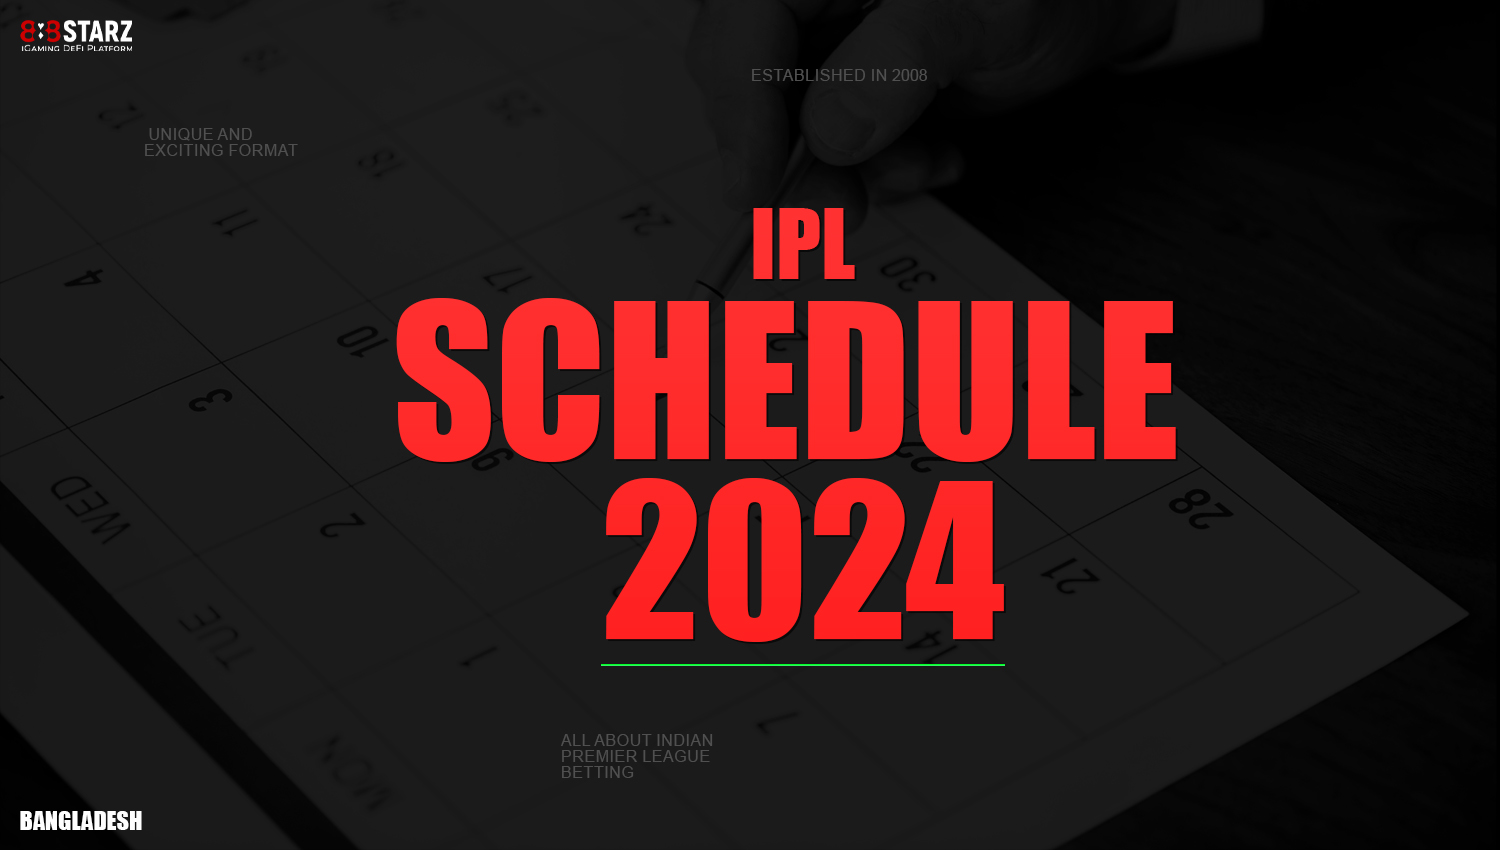 Schedule of all IPL matches available for betting at 888starz Bangladesh